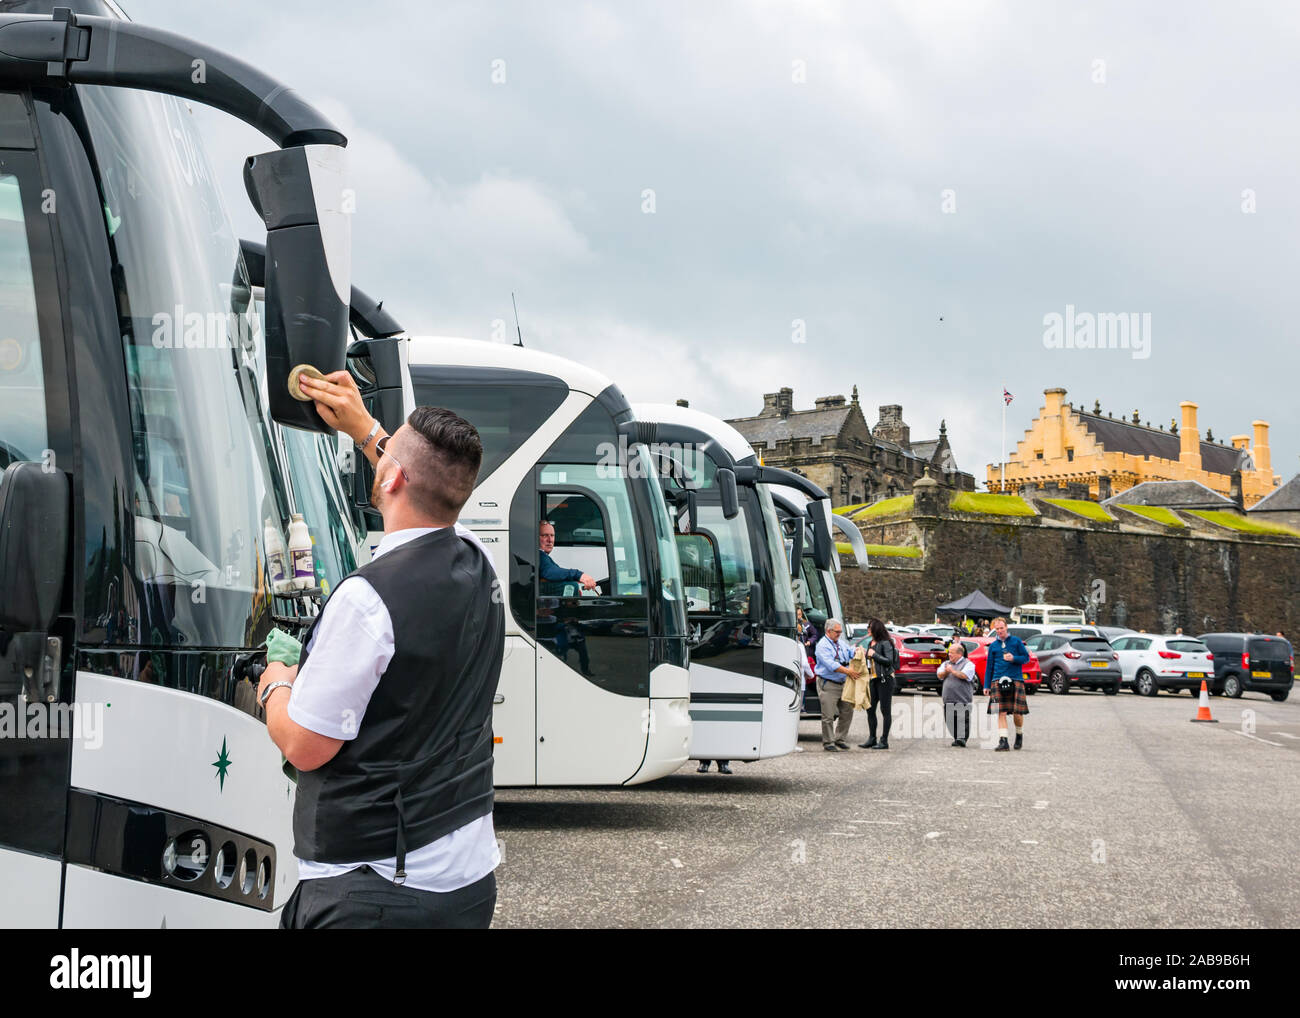 Coach and bus park with bus driver cleaning window, castle esplanade, Stirling Castle, Scotland, UK Stock Photo